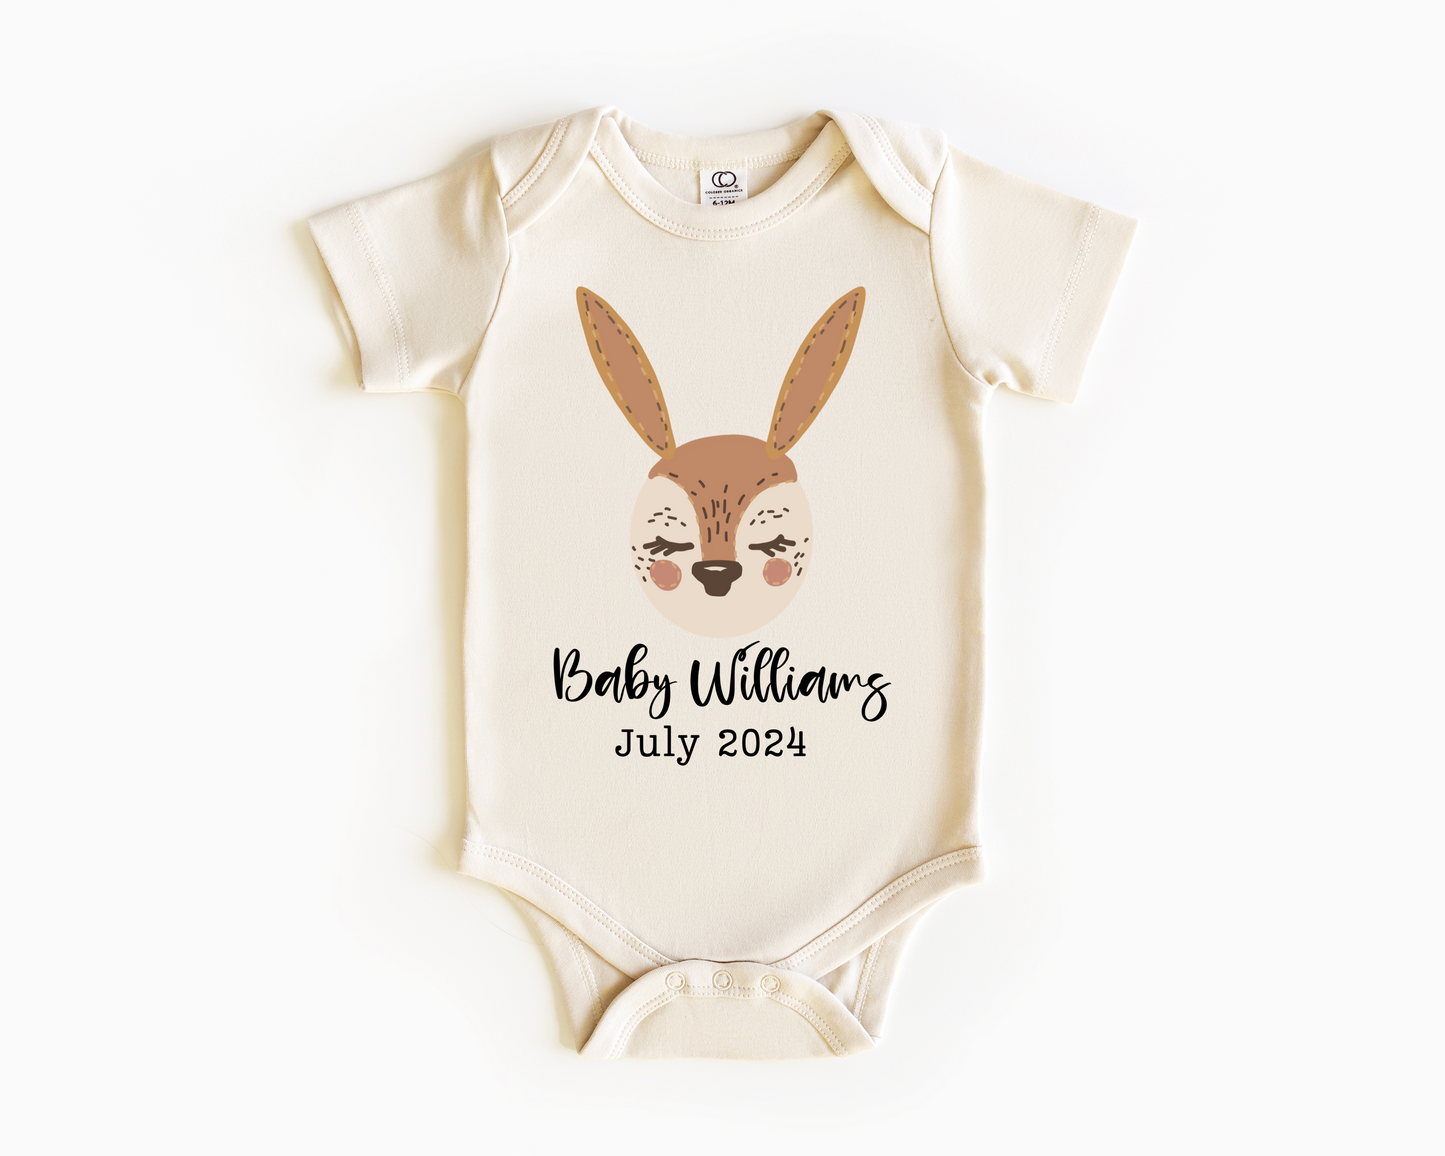 Personalised Name with Bunny Baby Onepiece for Pregnancy Announcement